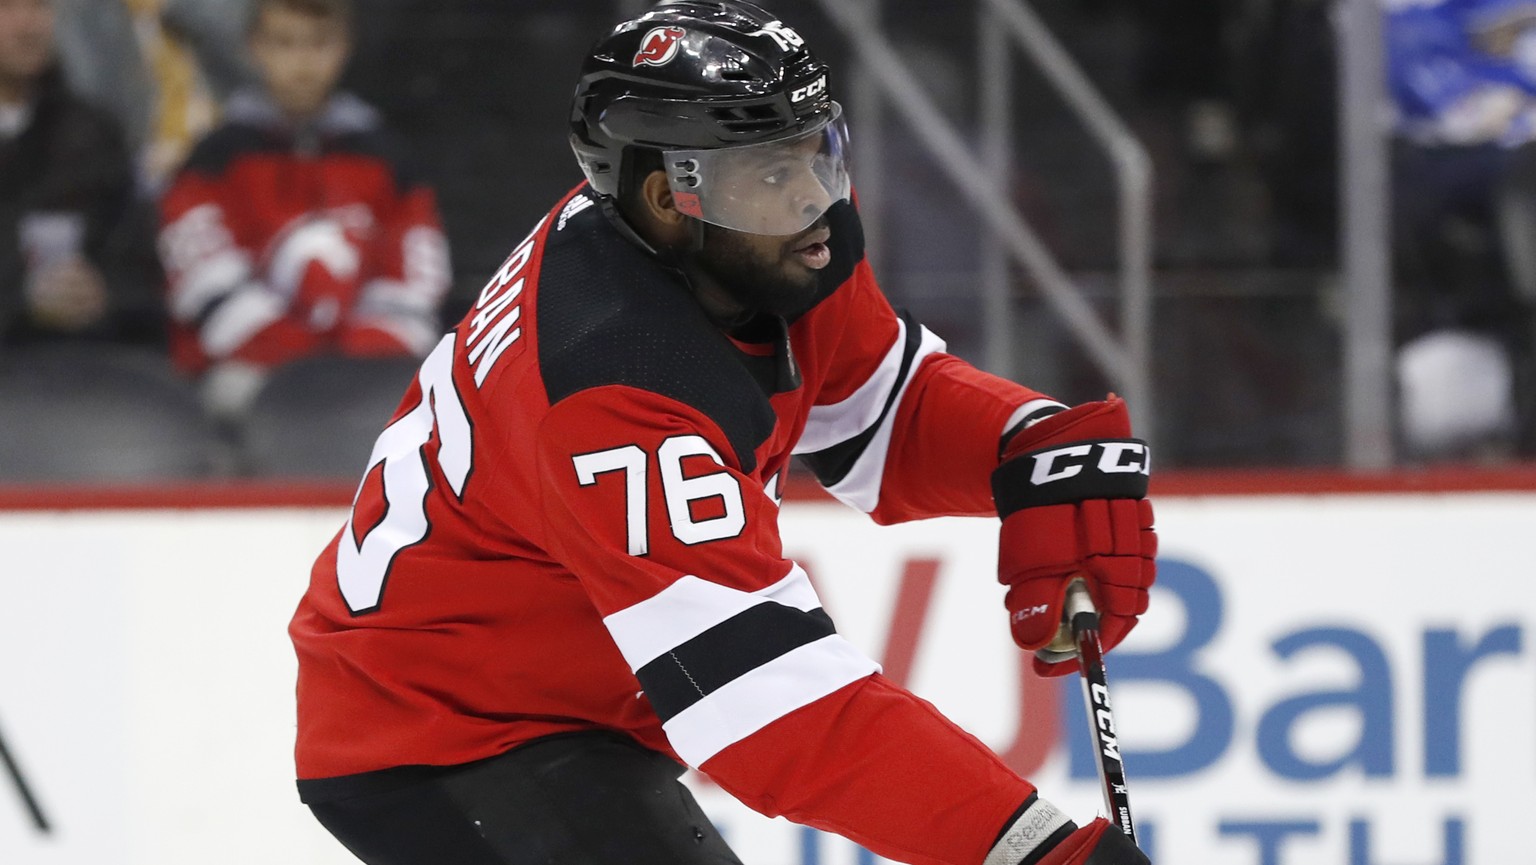 New Jersey Devils defenseman P.K. Subban (76) takes the puck upice during the first period of an NHL hockey game against the Detroit Red Wings, Thursday, Feb. 13, 2020, in Newark, N.J. (AP Photo/Kathy ...